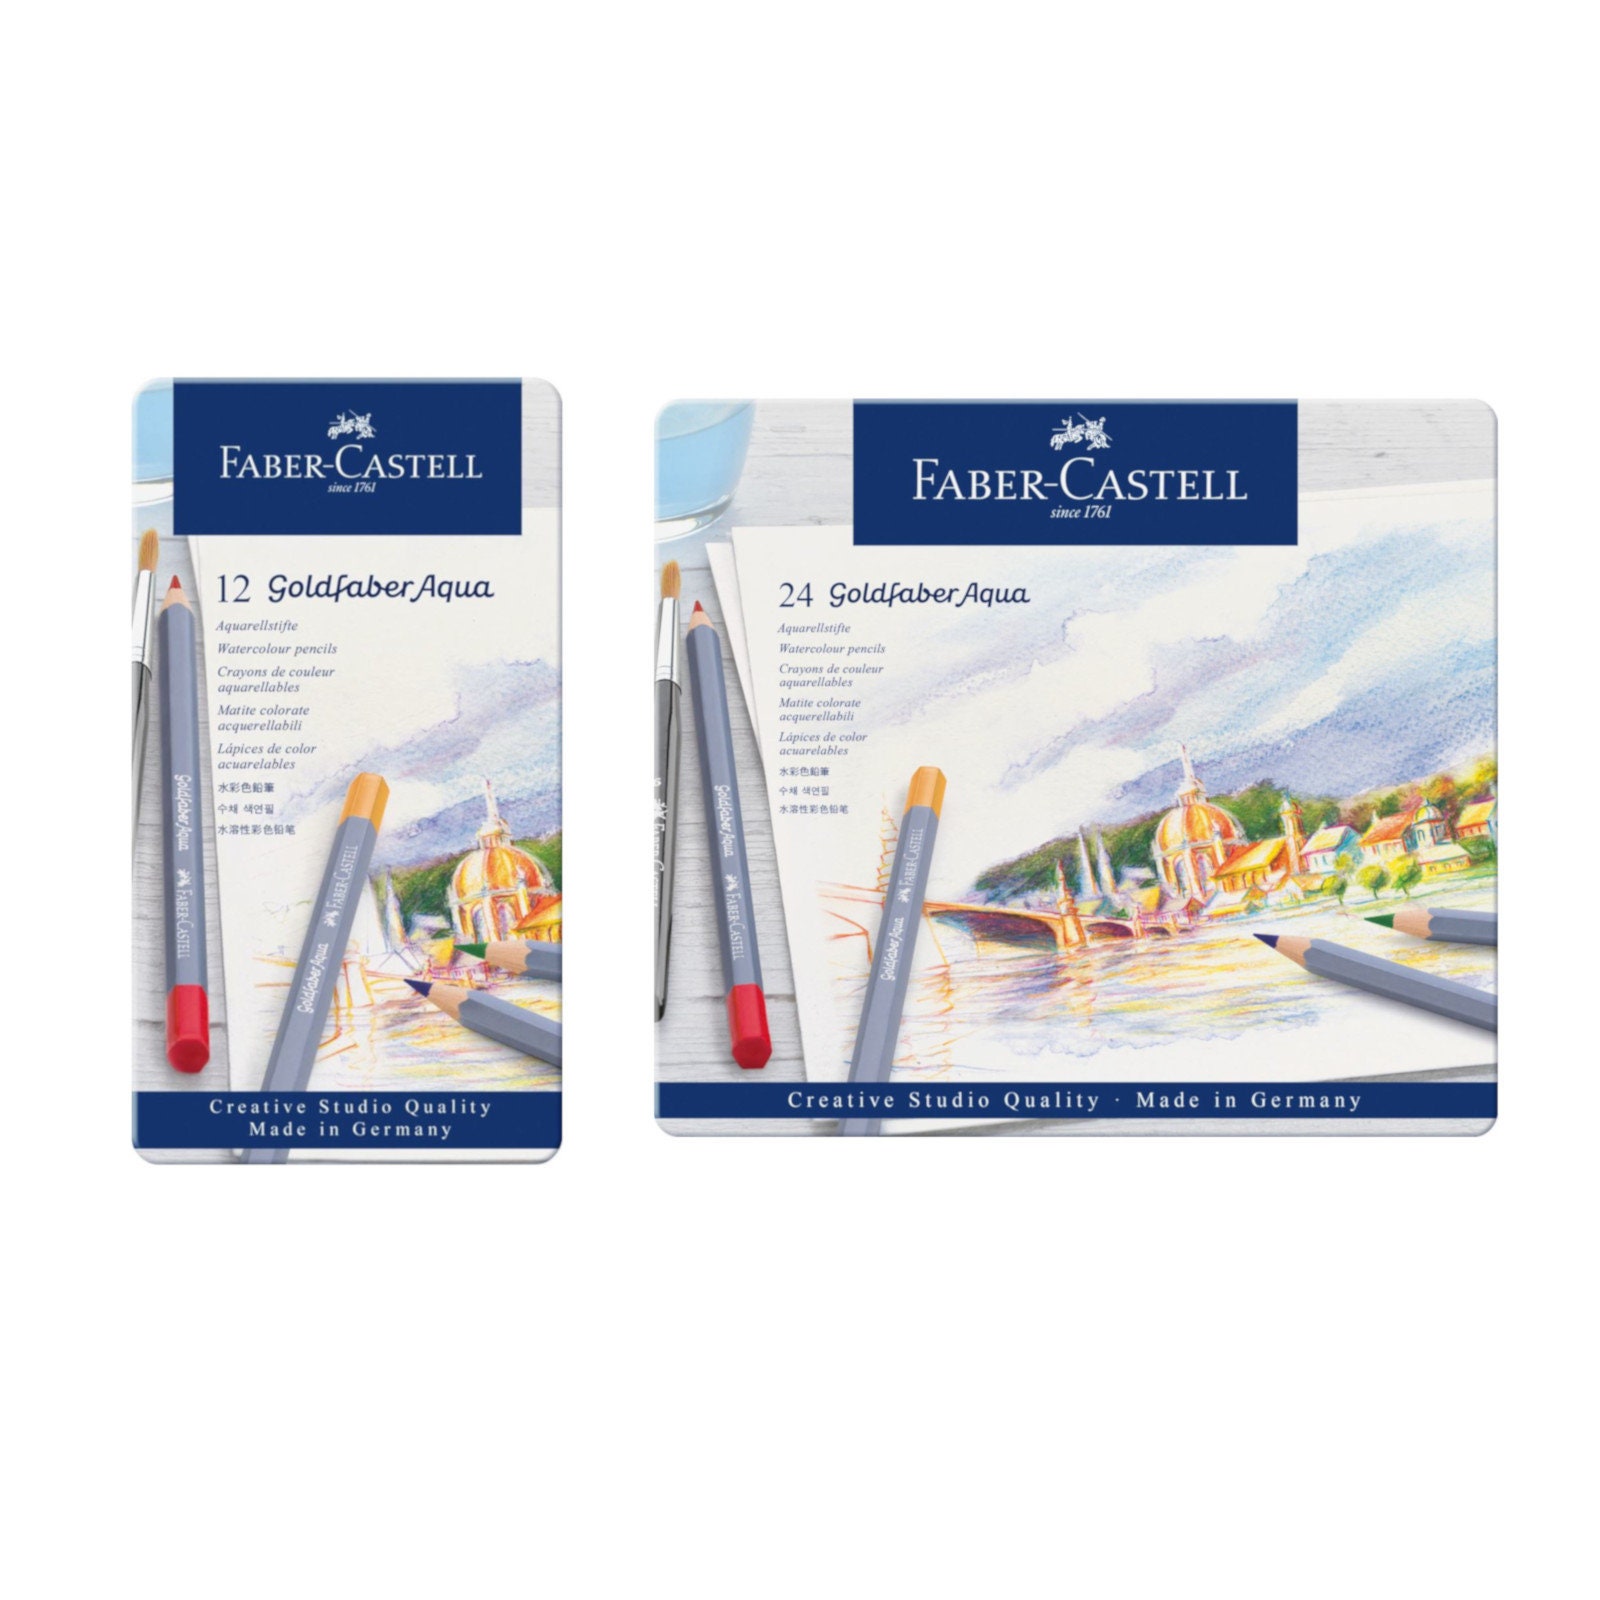  Faber-Castell Goldfaber Aqua Pastel Watercolor Pencils - 12  Pastel Water Colored Pencils, Water Color Pencils for Painting and Drawing  : Arts, Crafts & Sewing